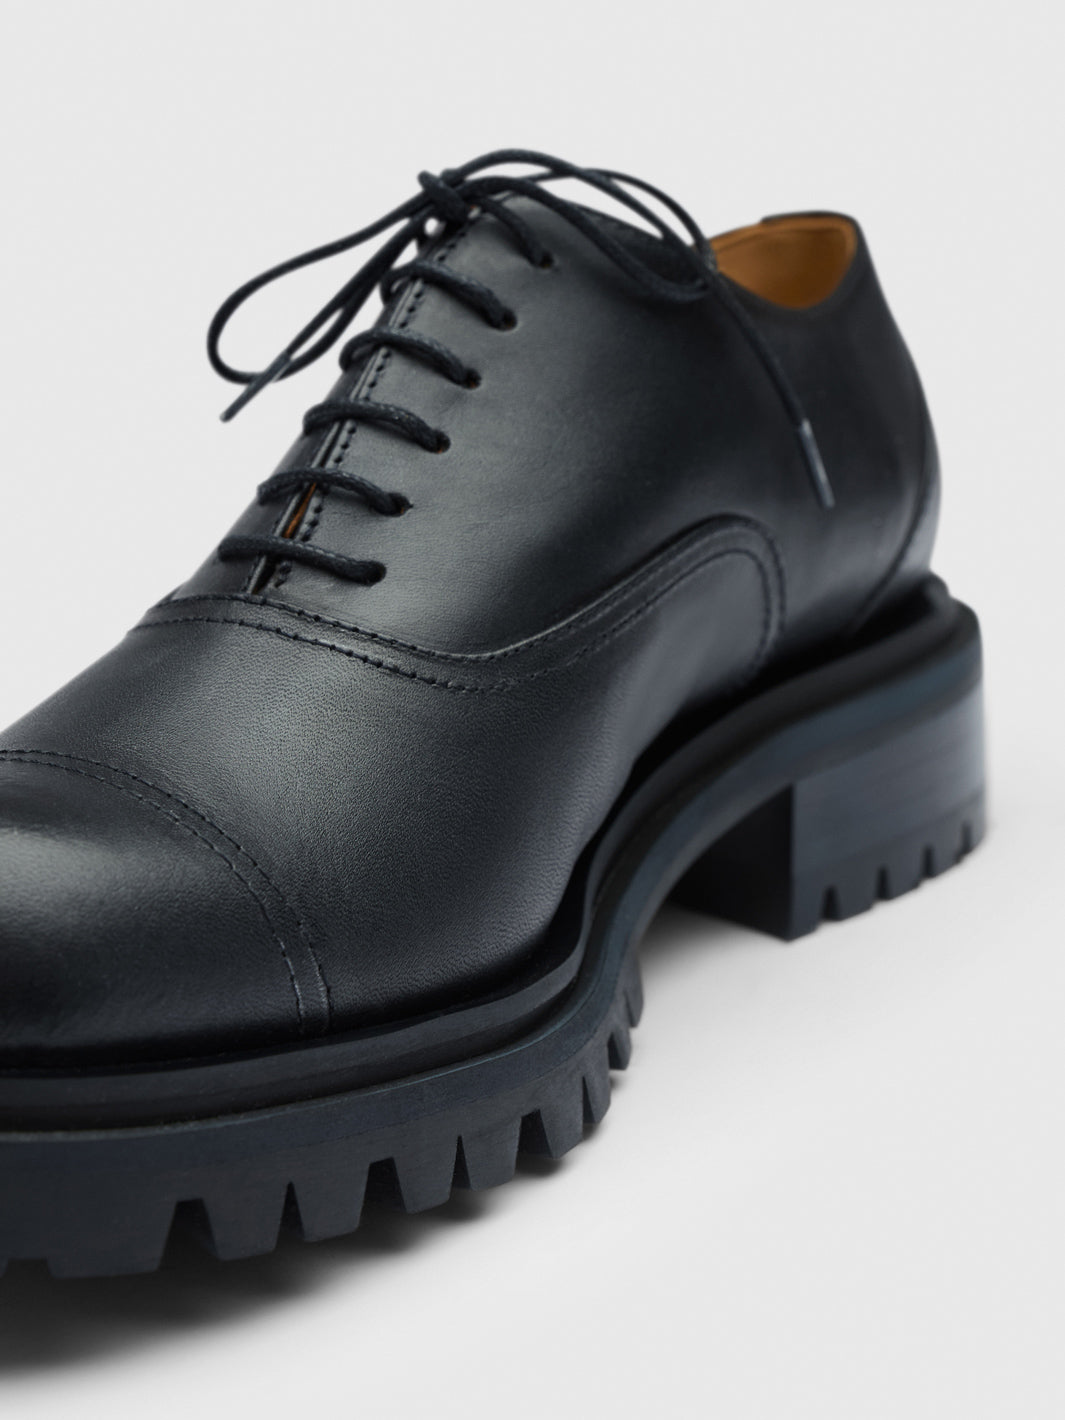 Spinea Black Leather Lace-up shoes